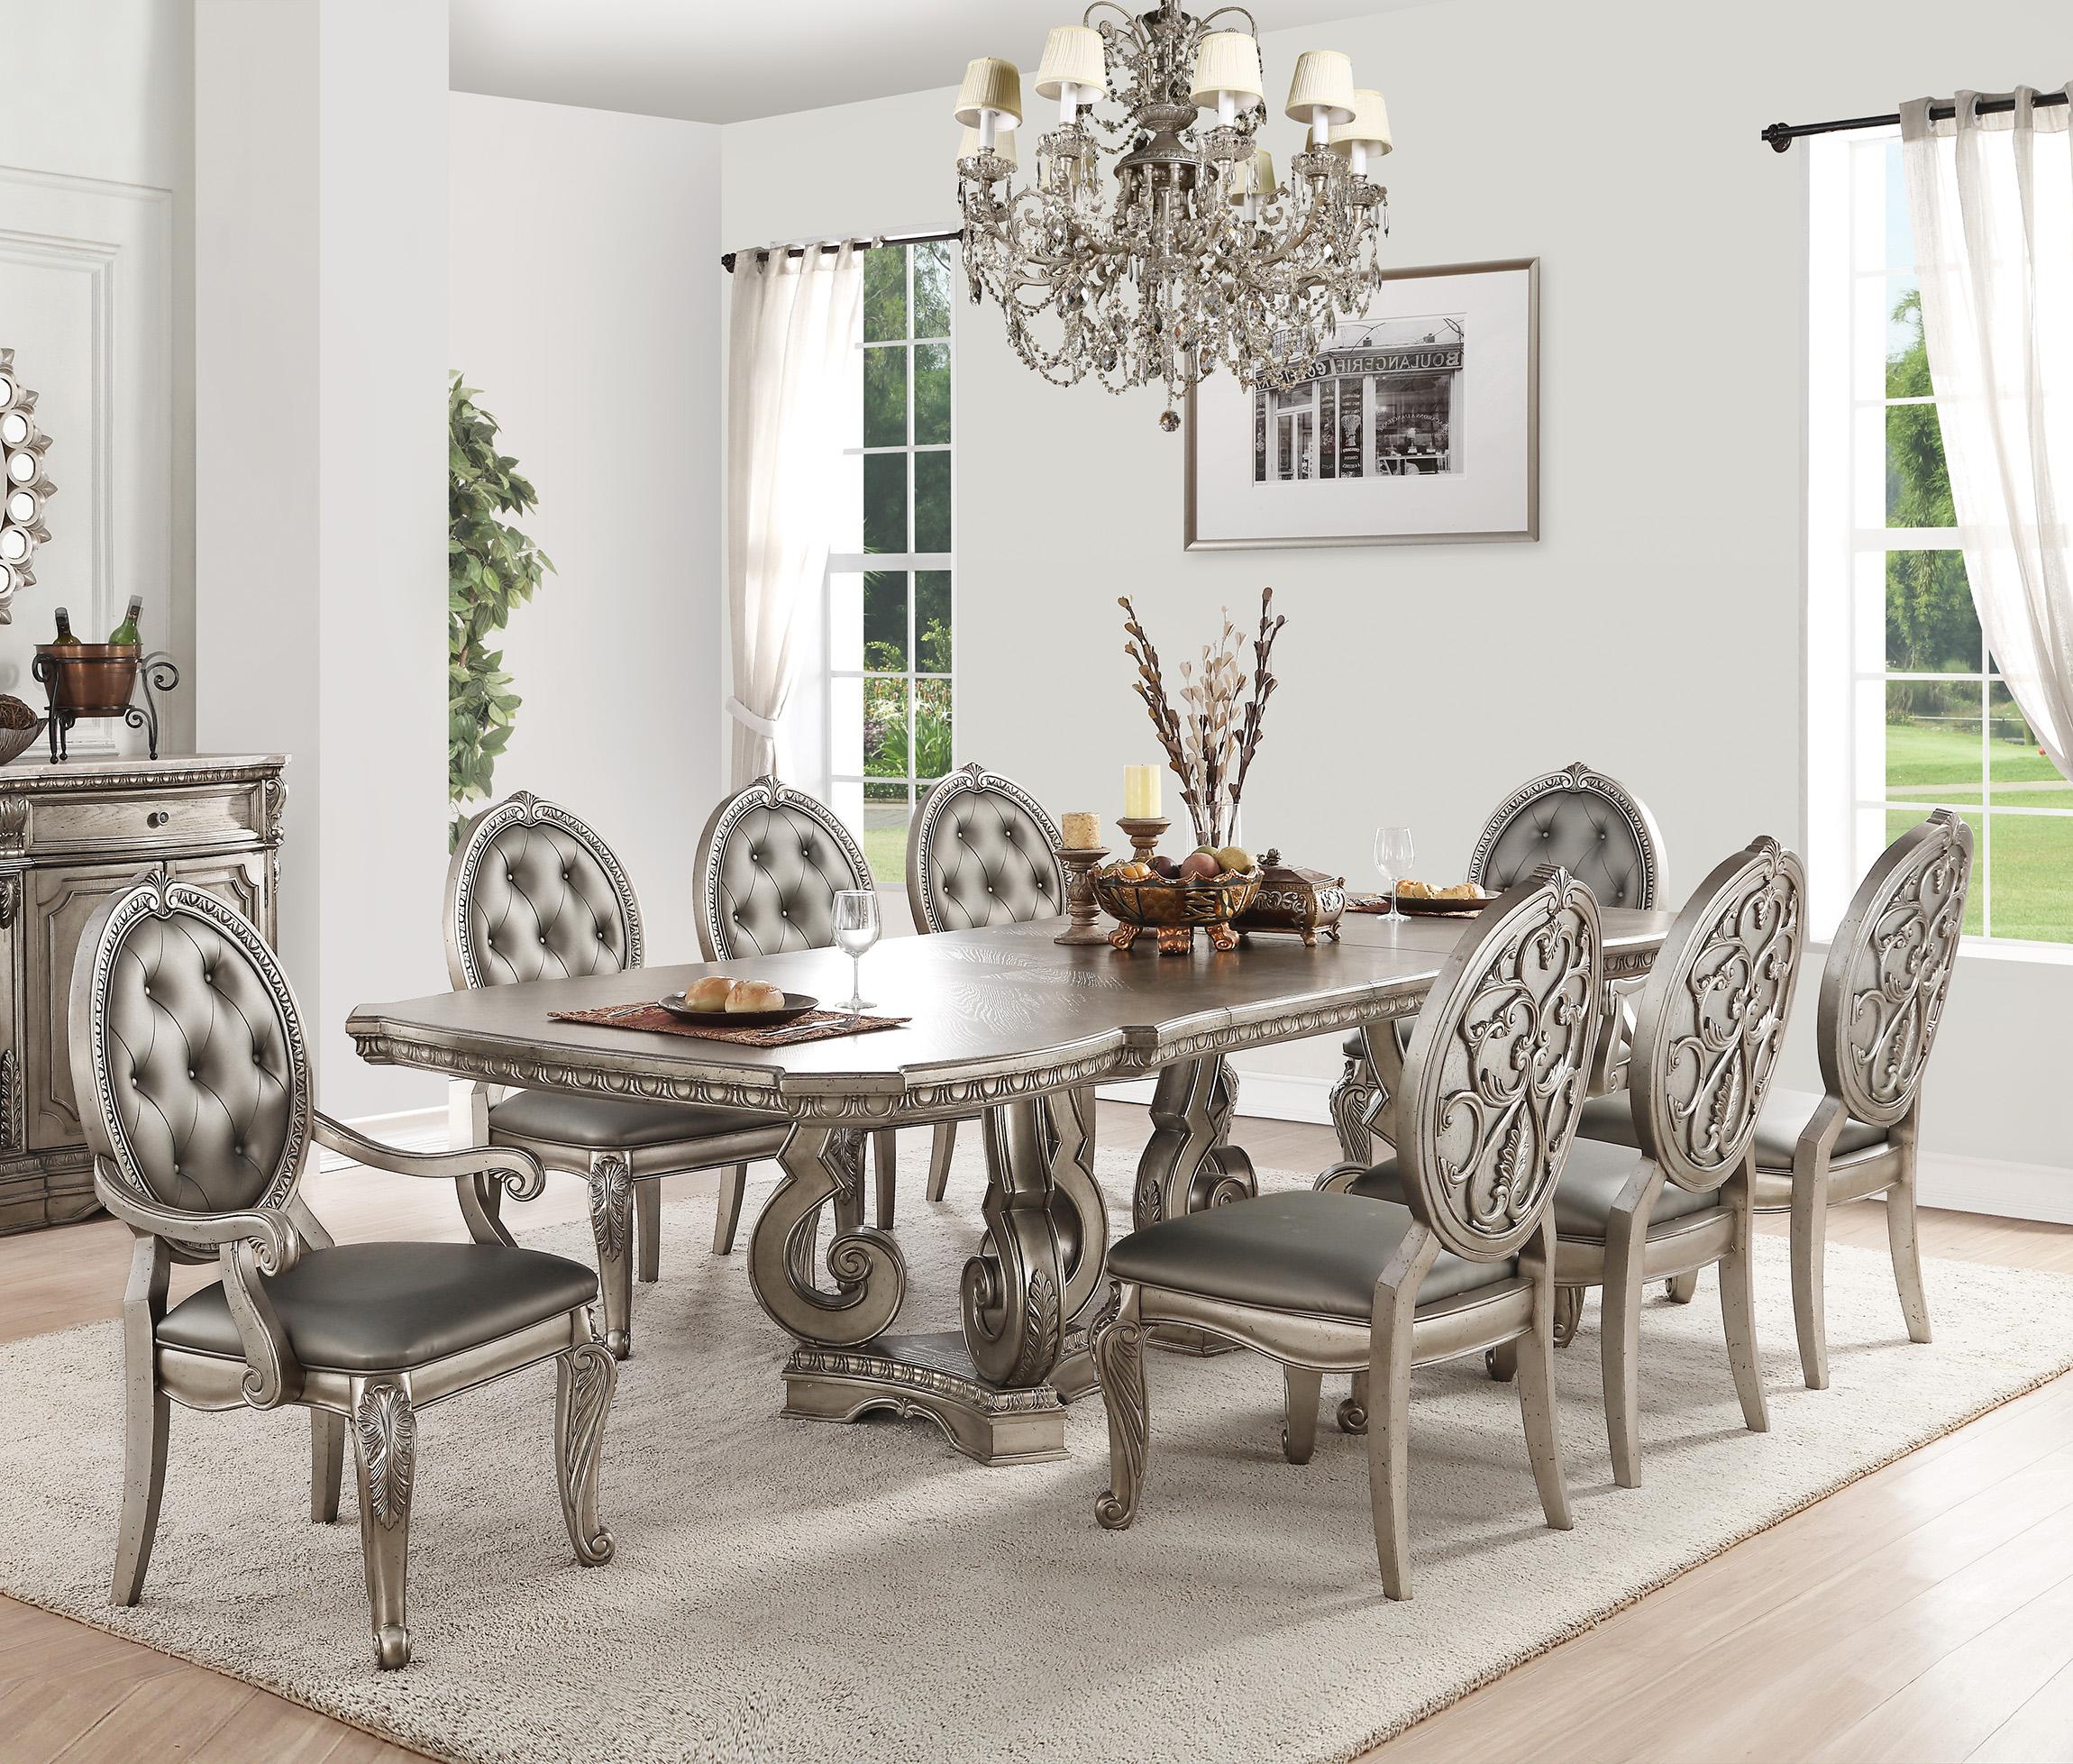 Classic, Traditional Dining Table Set Northville 66920-Set-9 in Antique Silver PU